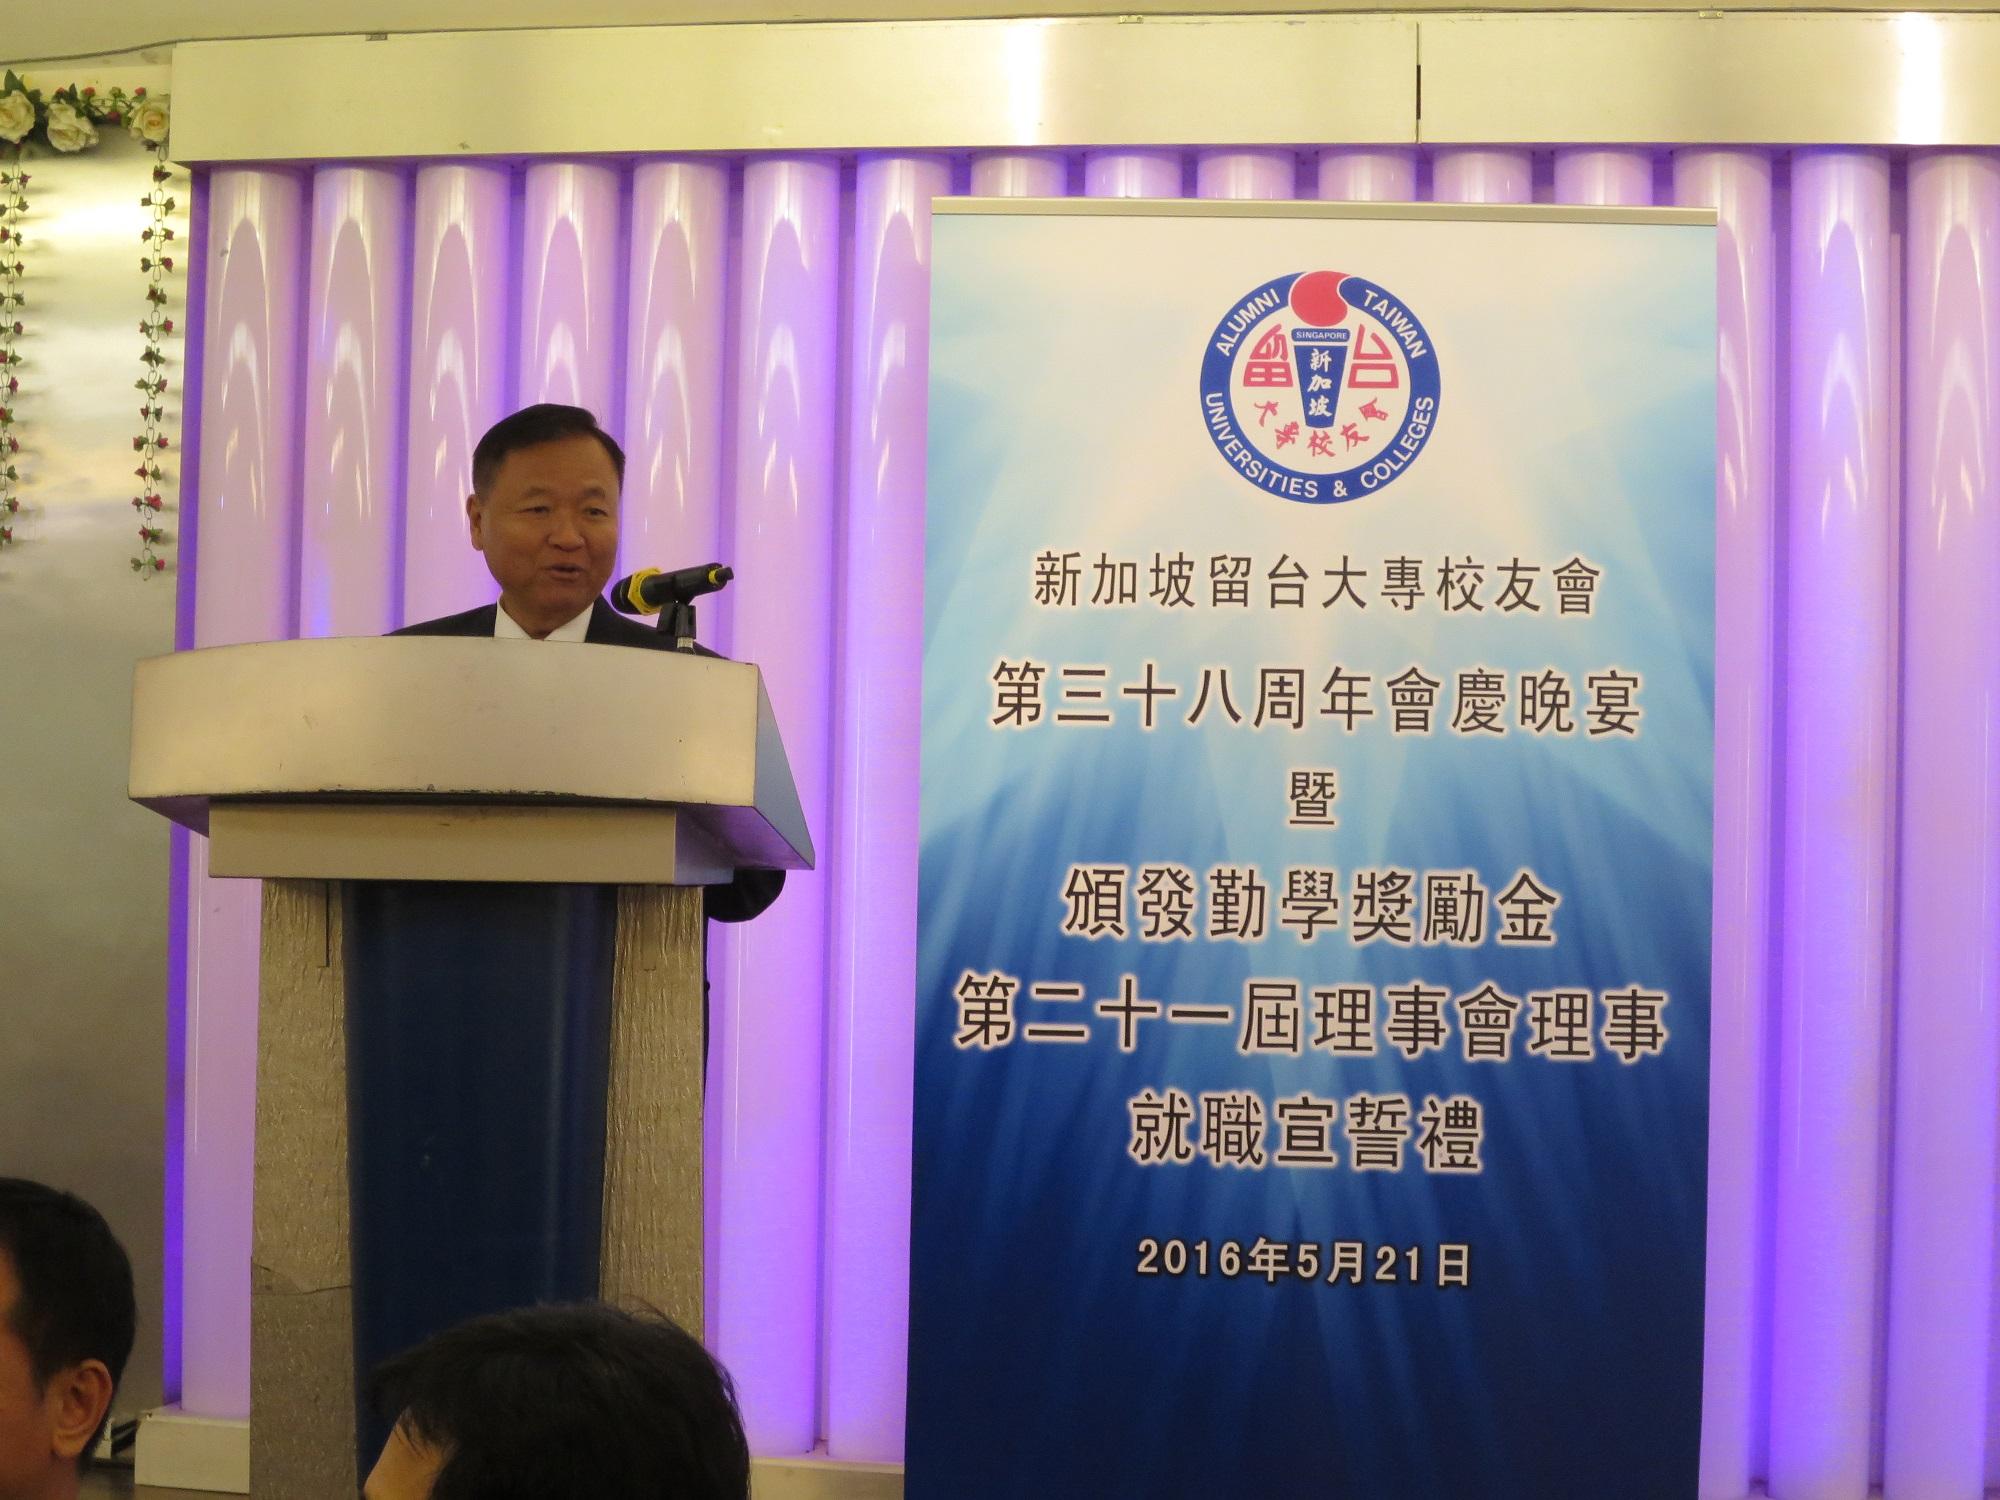 Representative Ta-Tung Jacob Chang delivering his address at ATUC Singapore’s 38th Anniversary Dinner cum Presentation of Diligent Study Awards